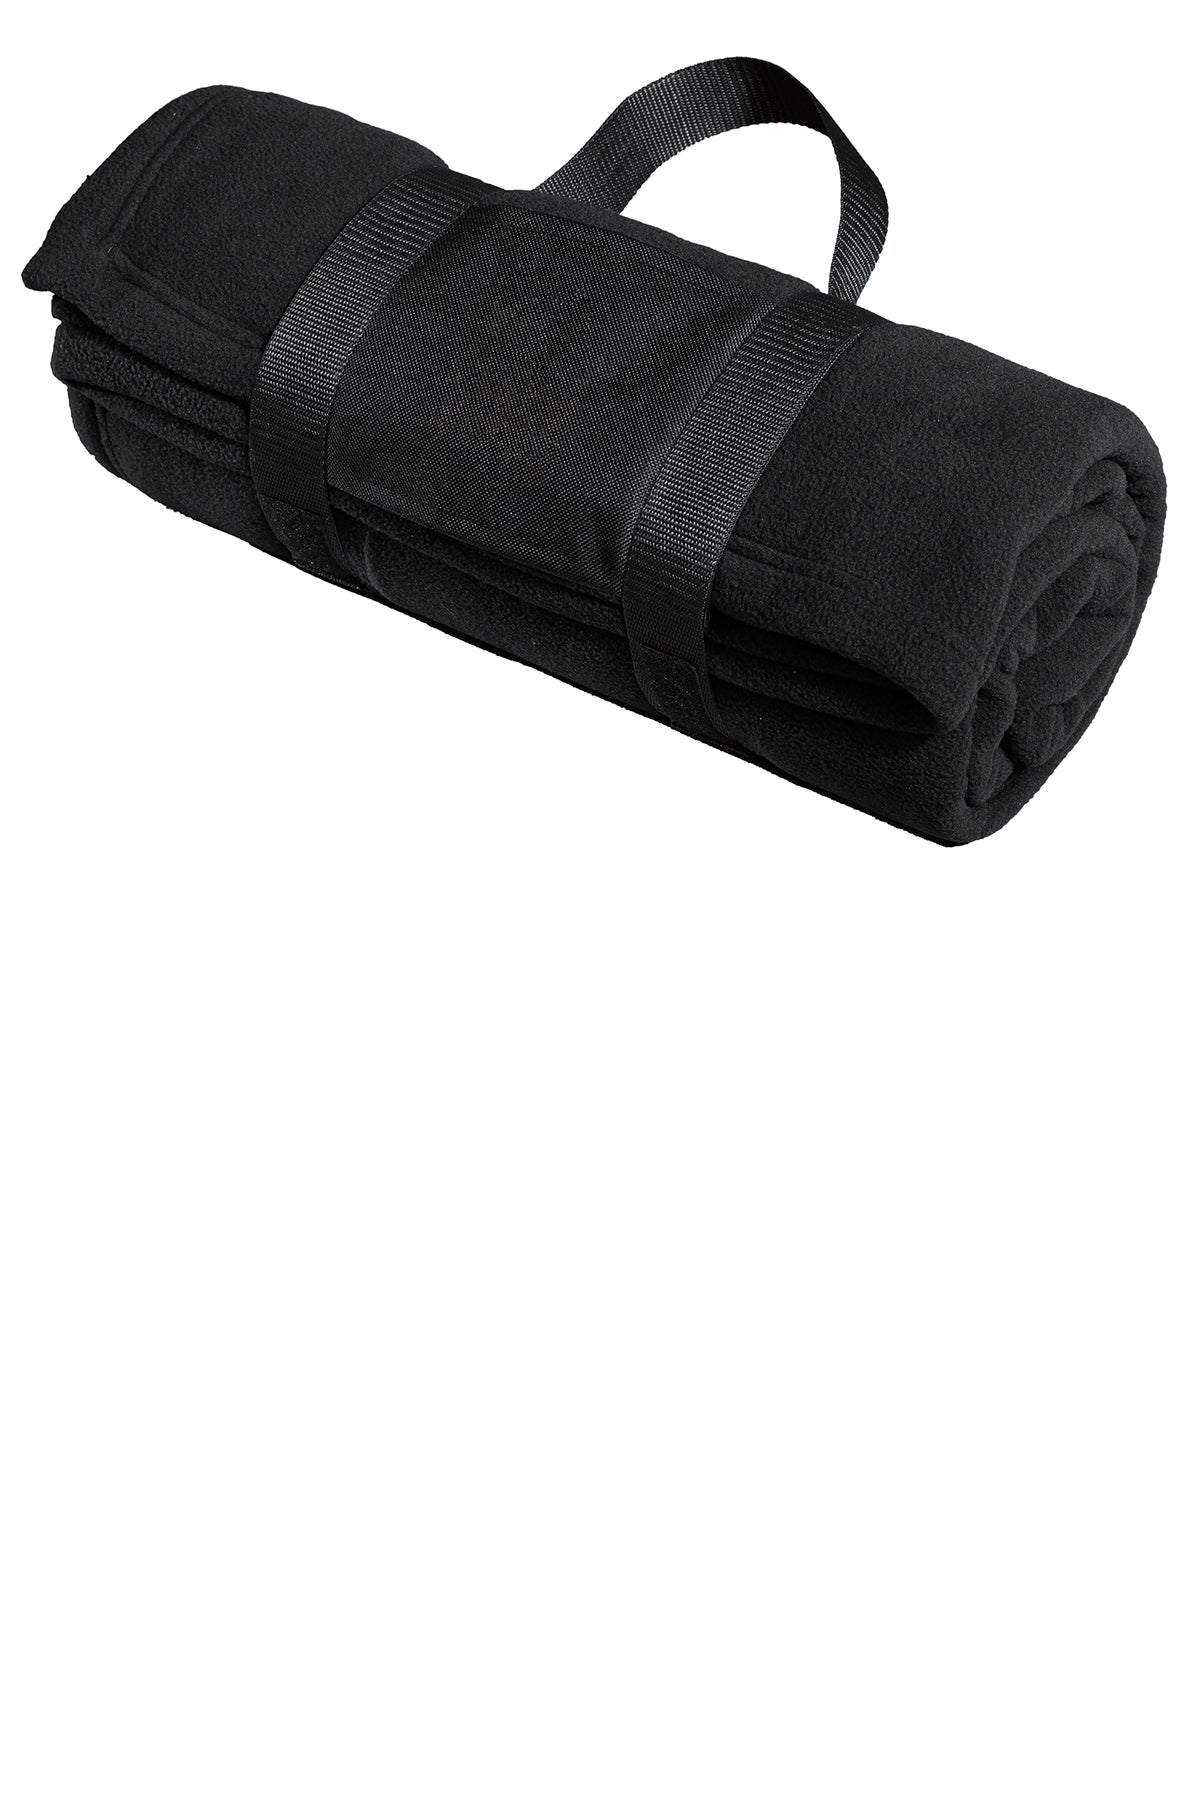 Port Authority Fleece Branded Blankets with Carrying Strap, Black